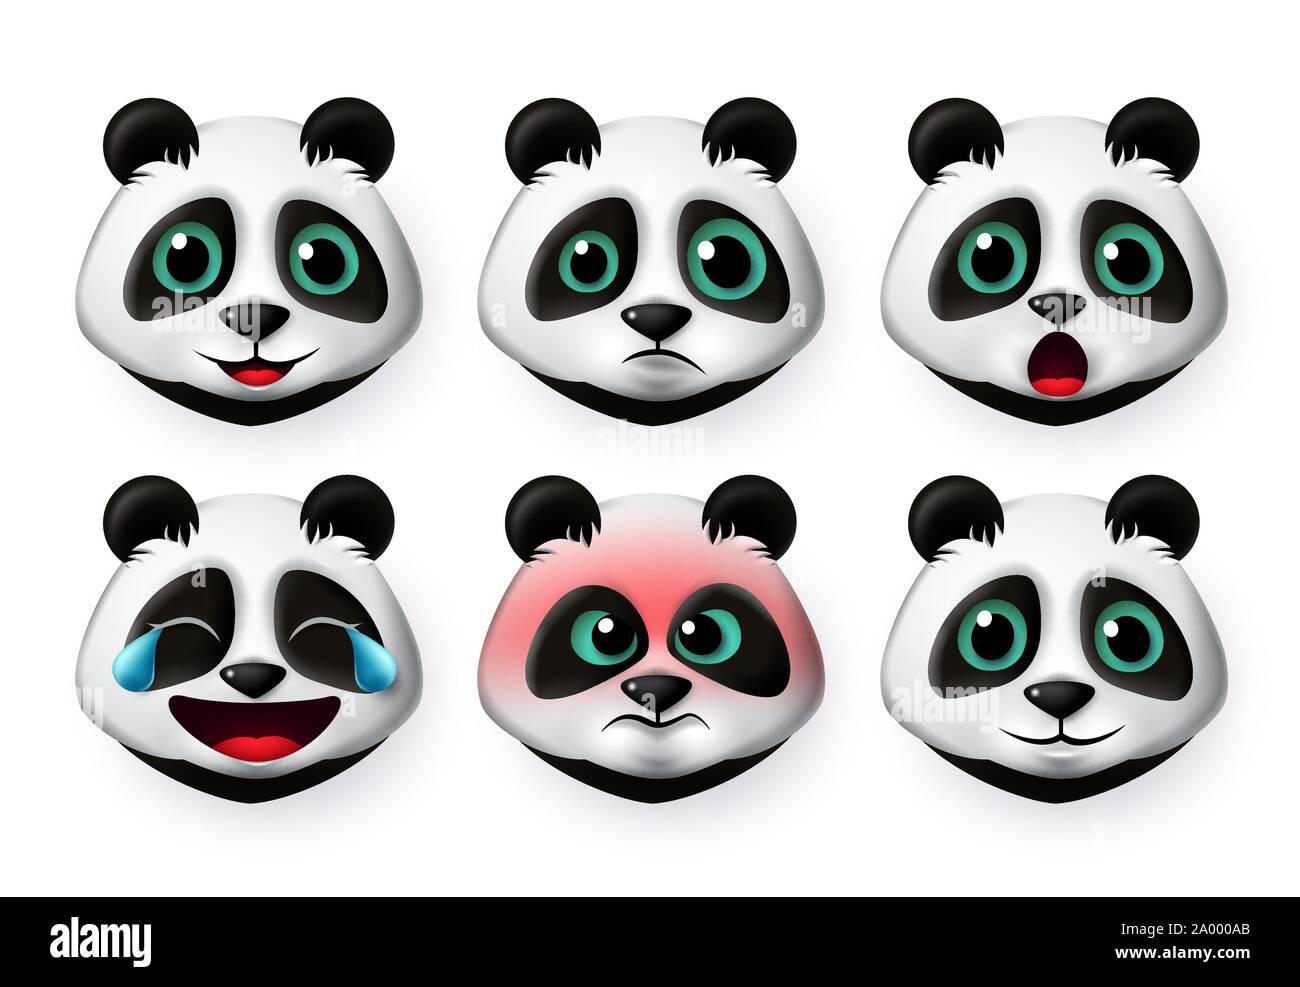 Panda emoji vector set. Big cute panda bear face emoticon in angry and happy emotions for character collection isolated in white background. Stock Vector